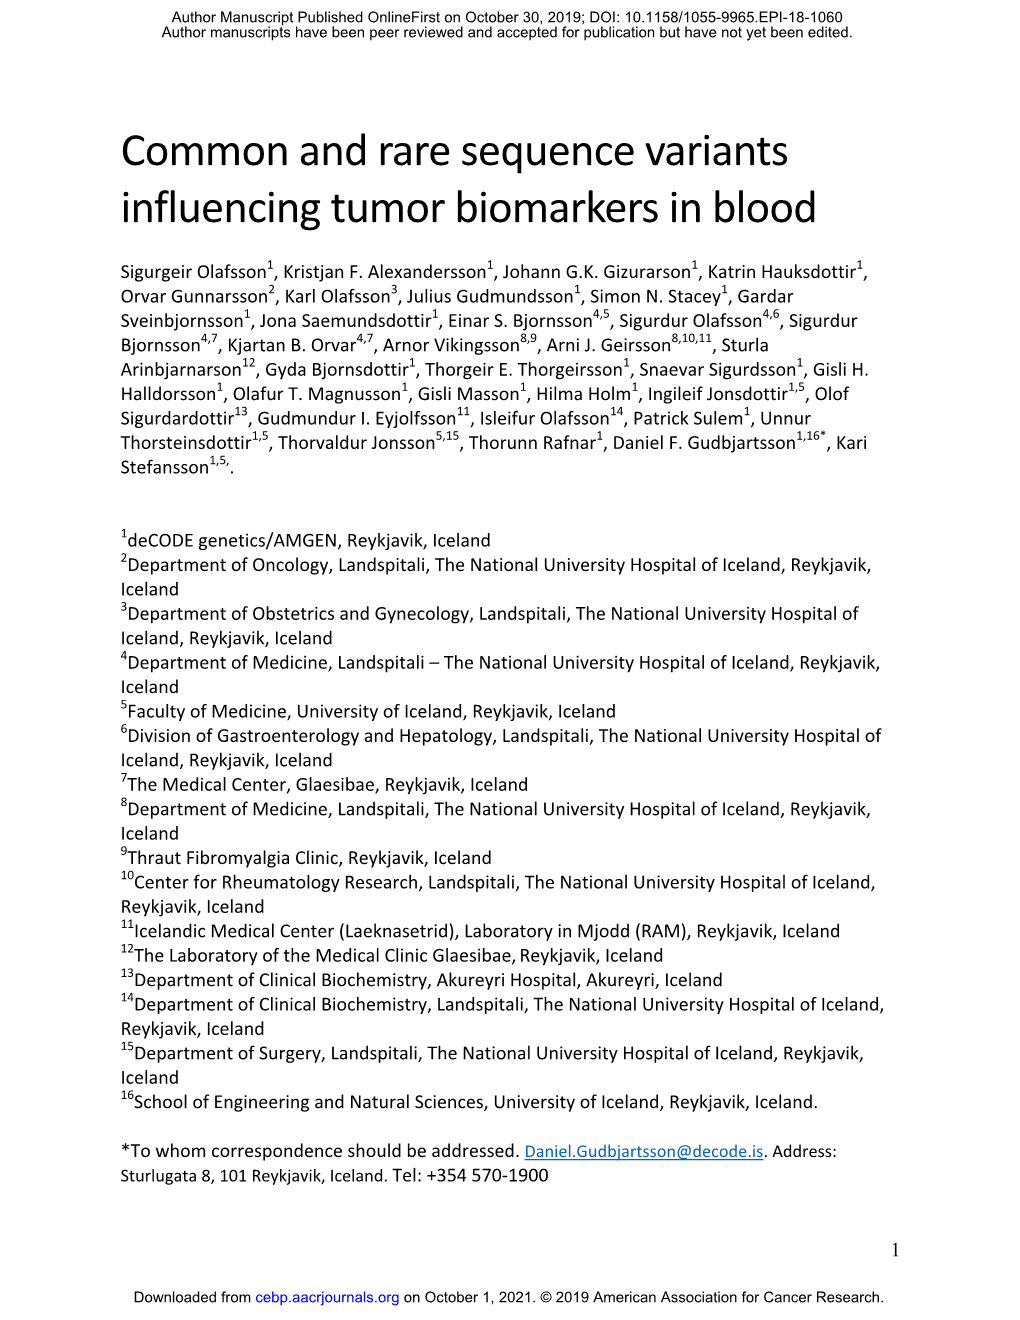 Common and Rare Sequence Variants Influencing Tumor Biomarkers in Blood